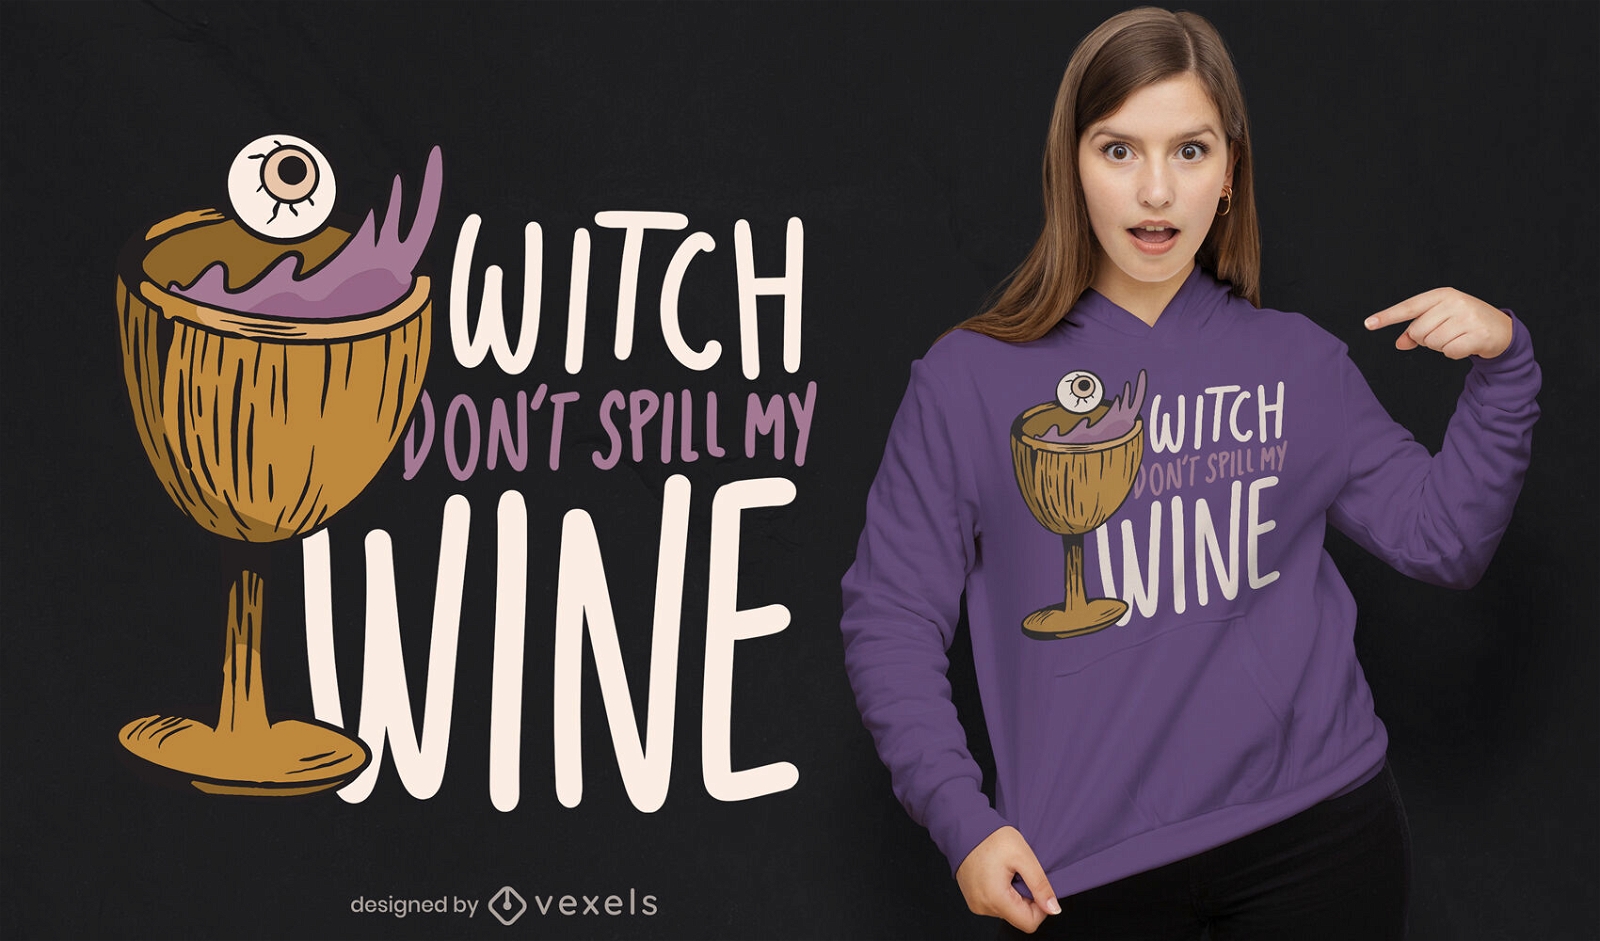 Wine drink witch quote t-shirt design